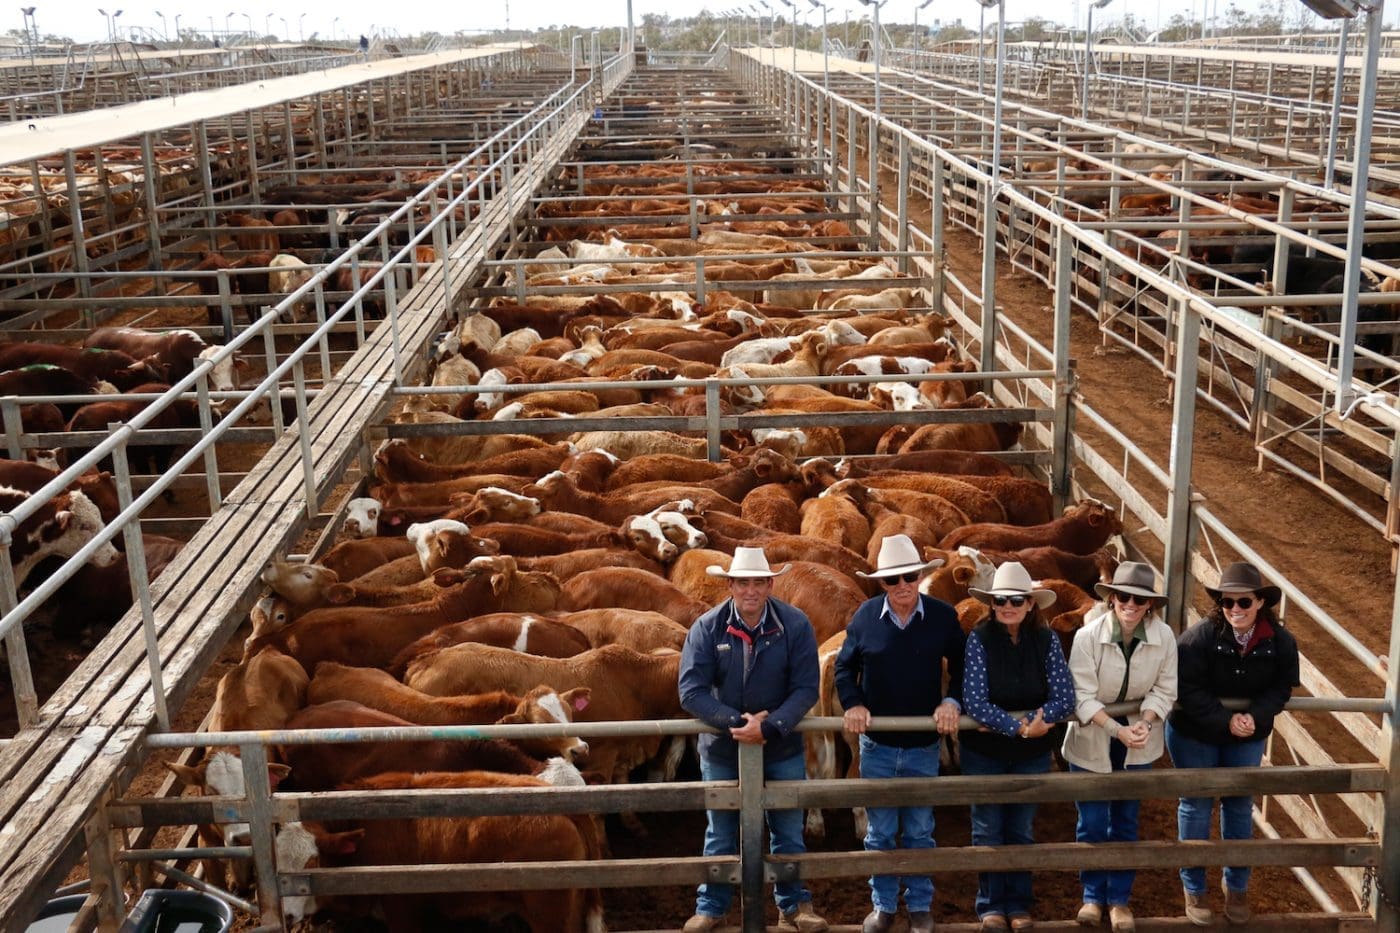 Roma store sale 28 July 2020: Competition firm for quality lines - Beef  Central